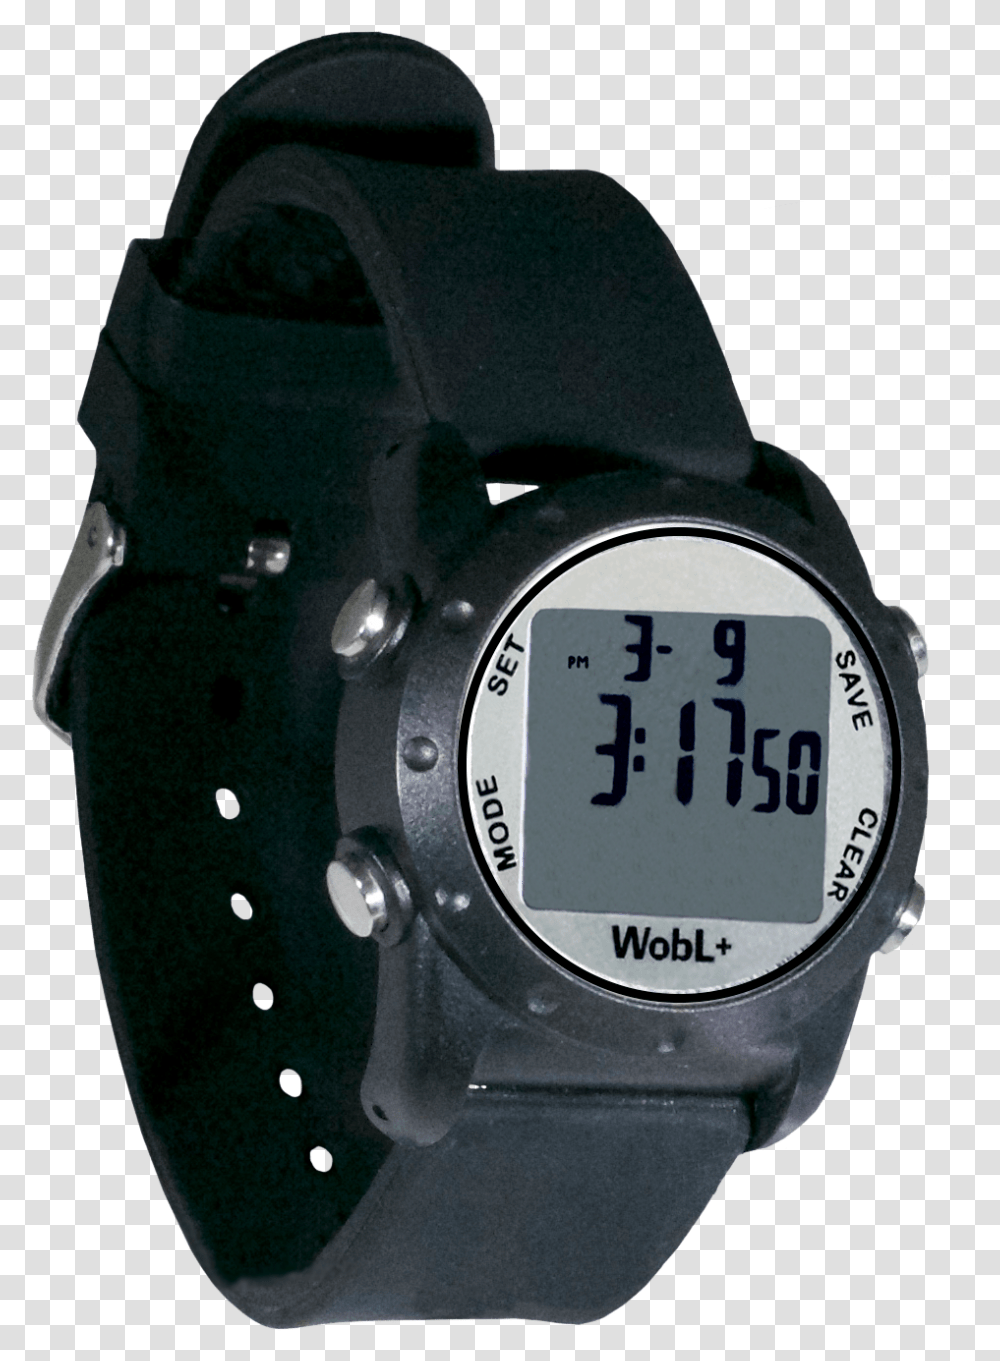 Black Waterproof Wobl Vibrating Alarm Watch With 9 Watch, Wristwatch, Digital Watch, Clock Tower, Architecture Transparent Png